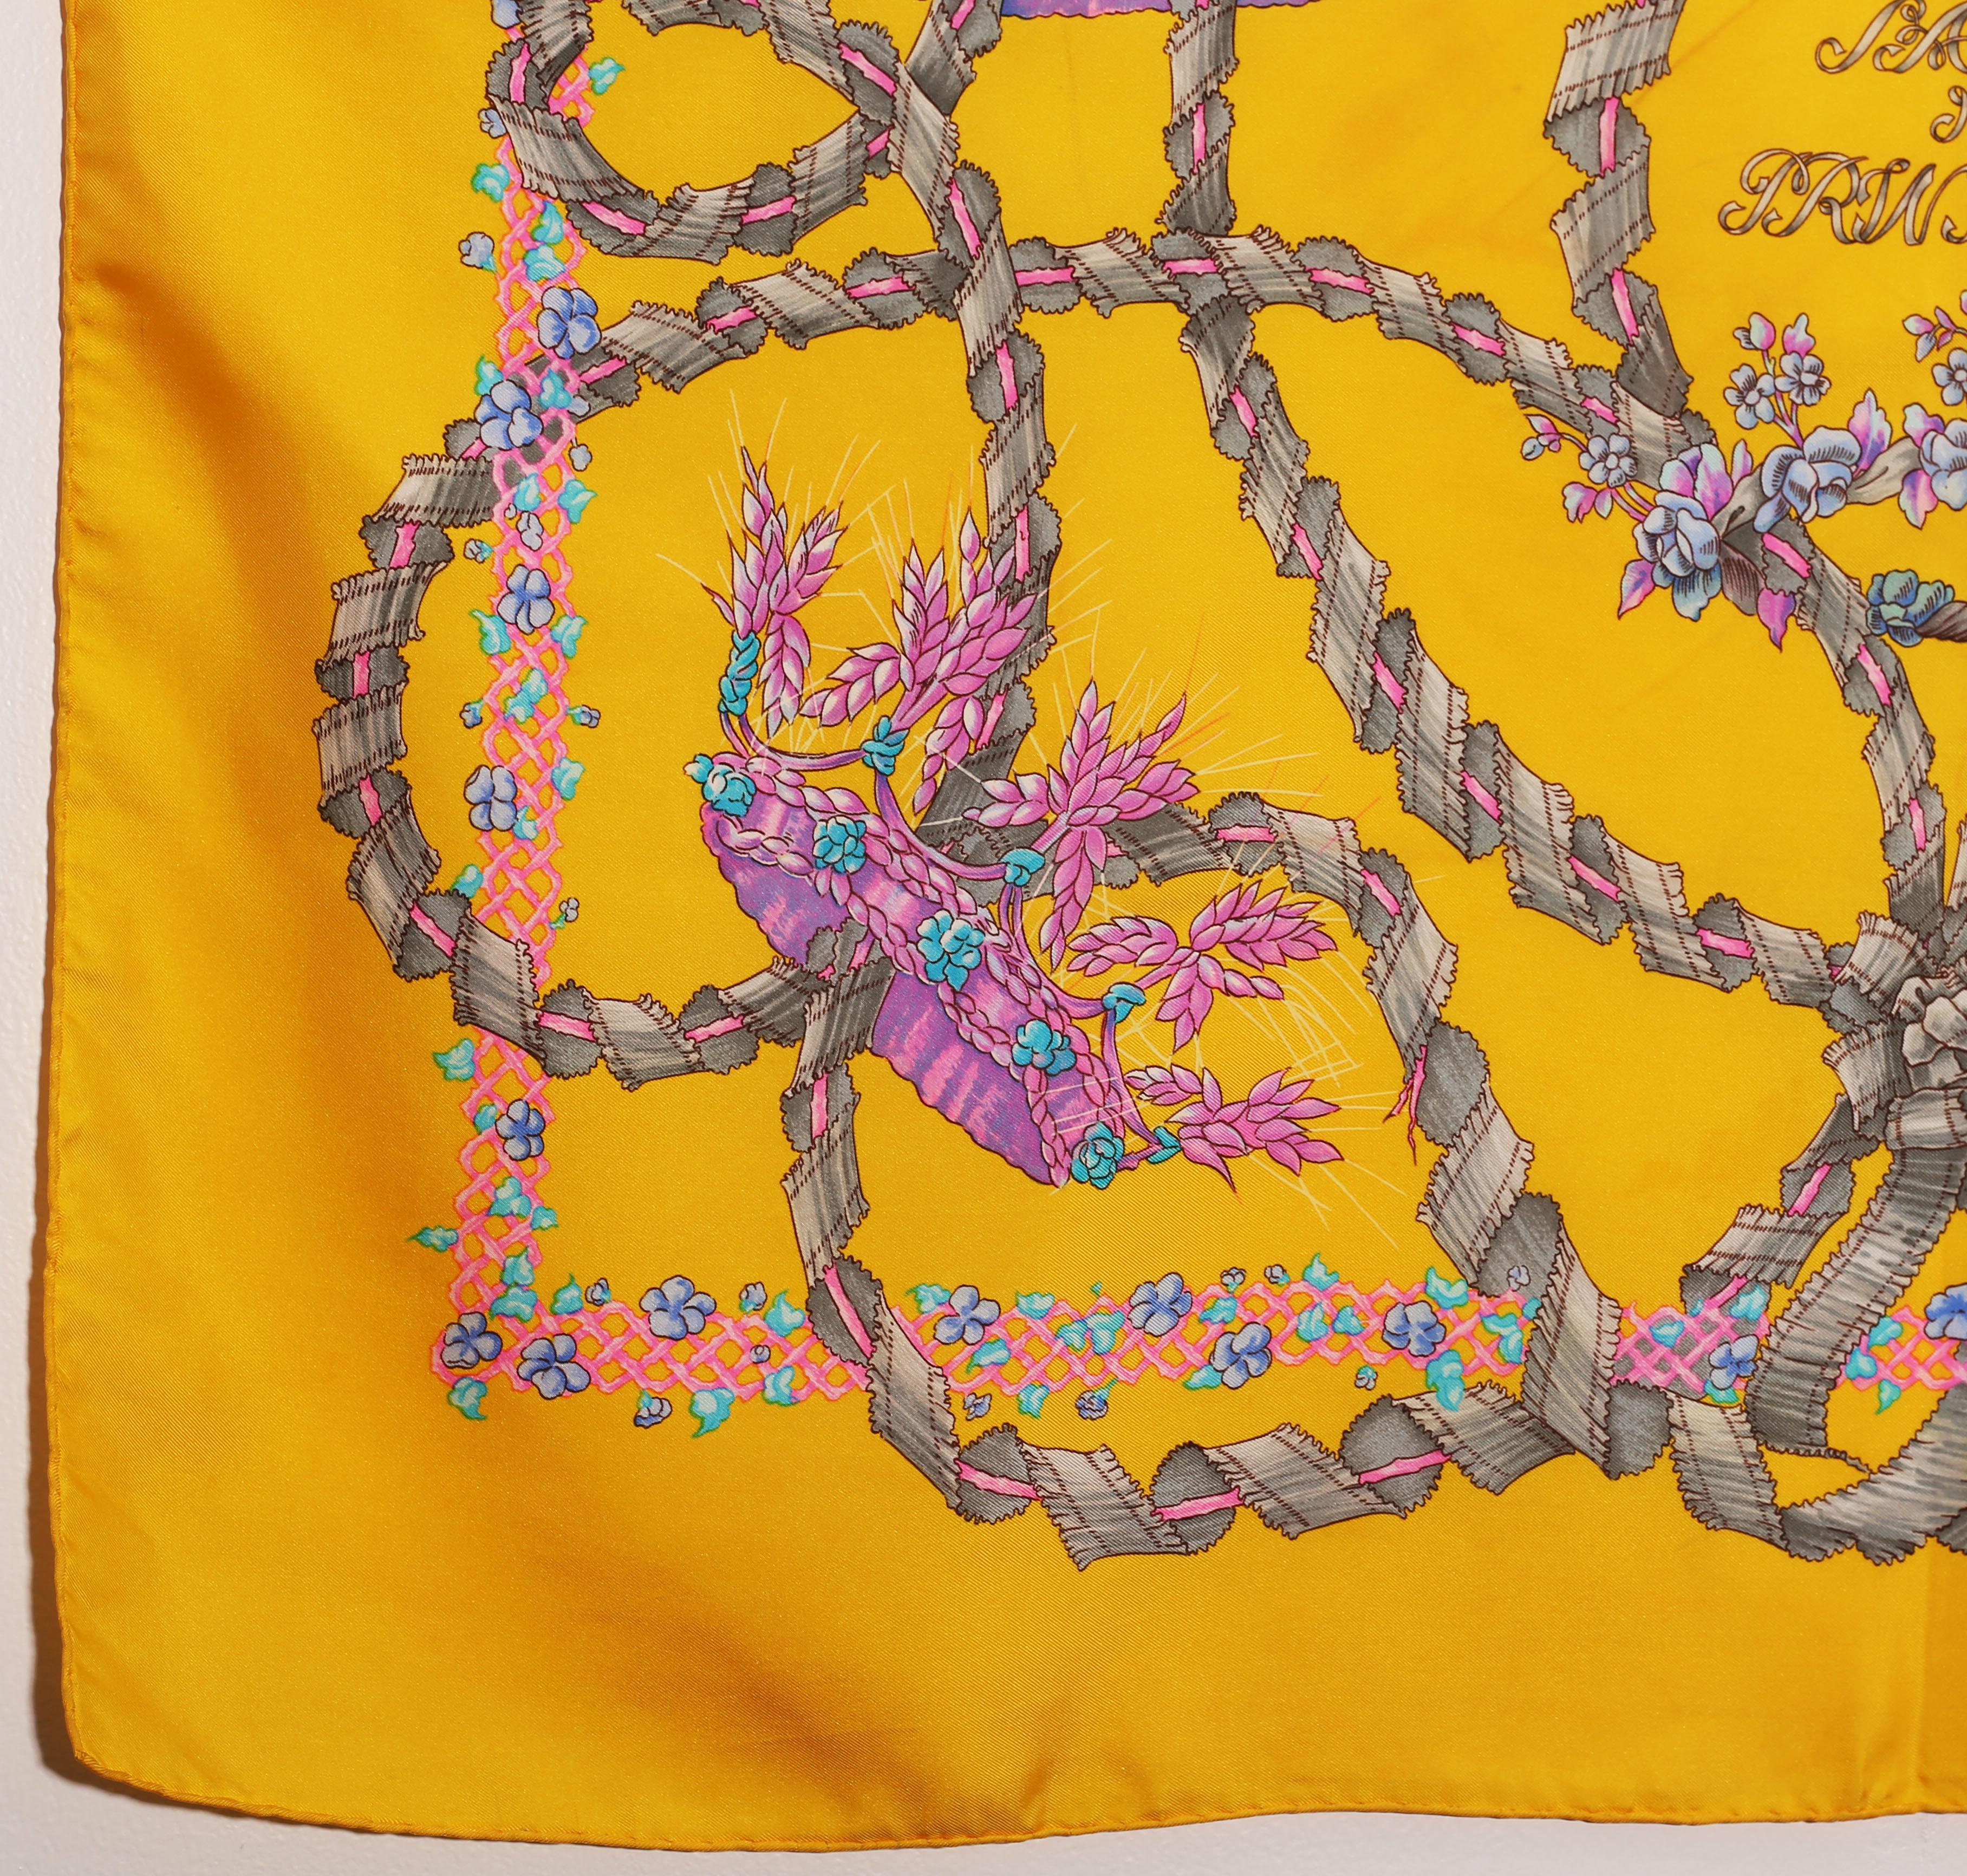 HERMES Scarf  Silk Scarf 100%  Paris, Made In France 
Le Sacre du Printemps
Designed by Henri d'Origny in 1986 


*Orders welcome  all goods are insured and we package all purchases to a high standard.

All Hermès scarves are crafted in a